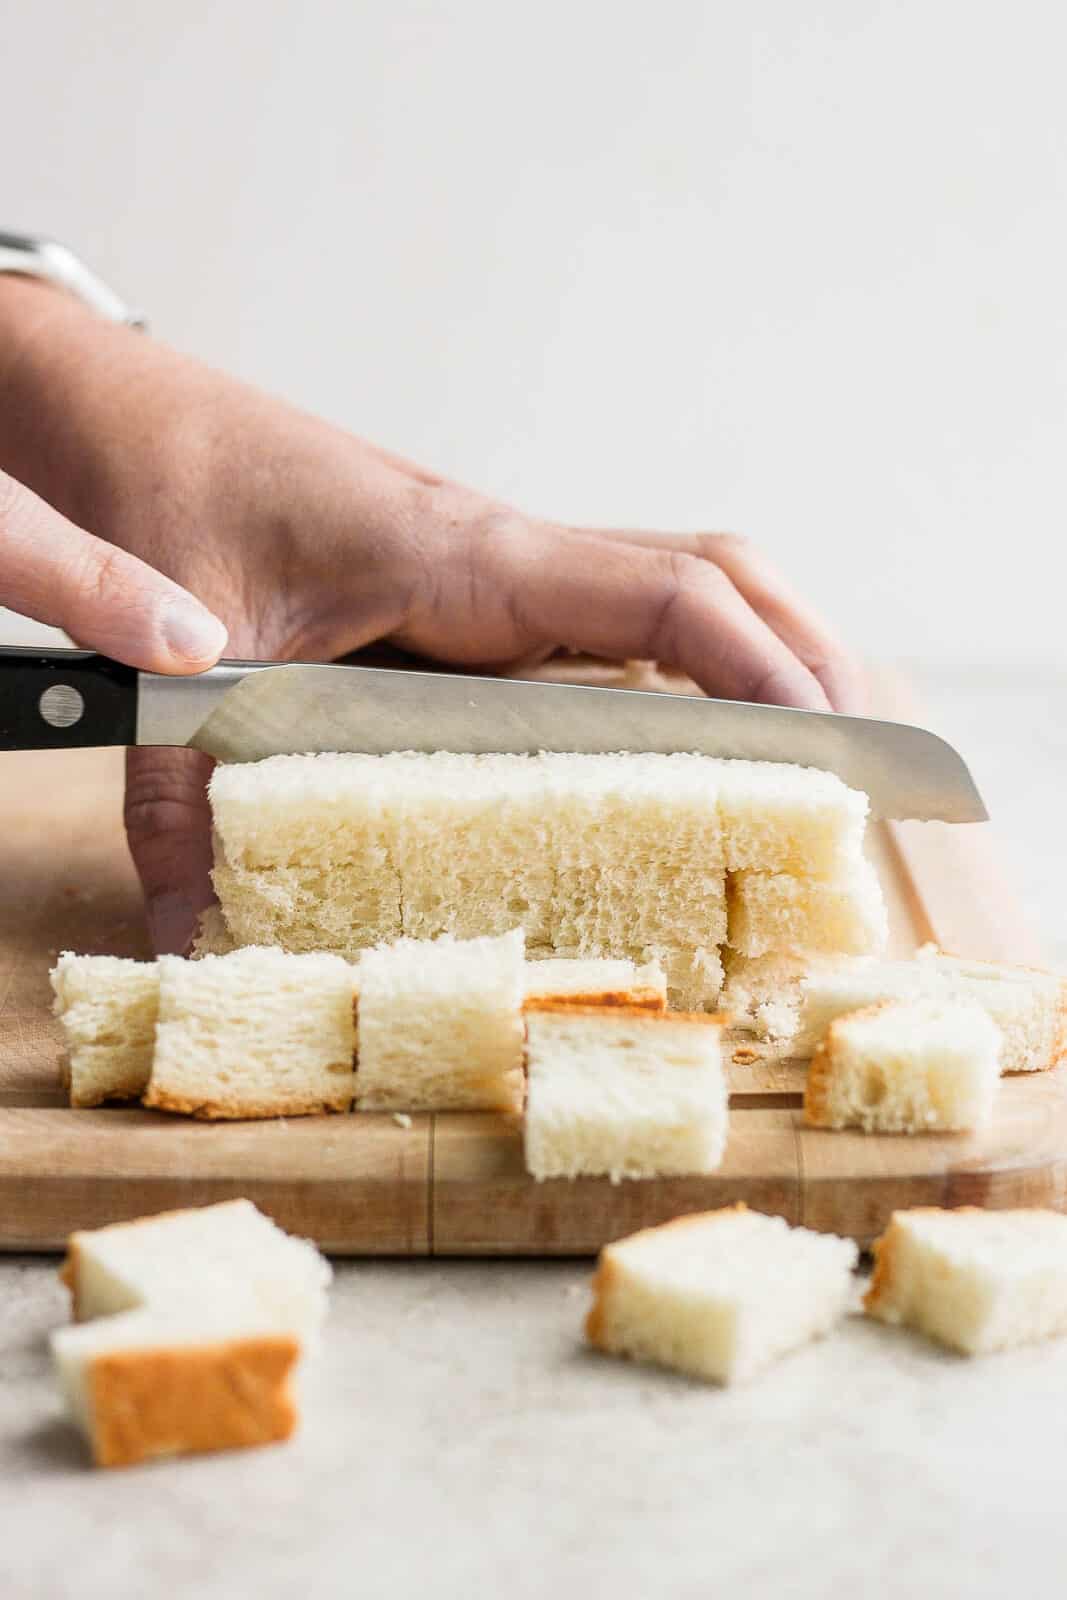 Slices of bread being diced into cubes on a cutting board.